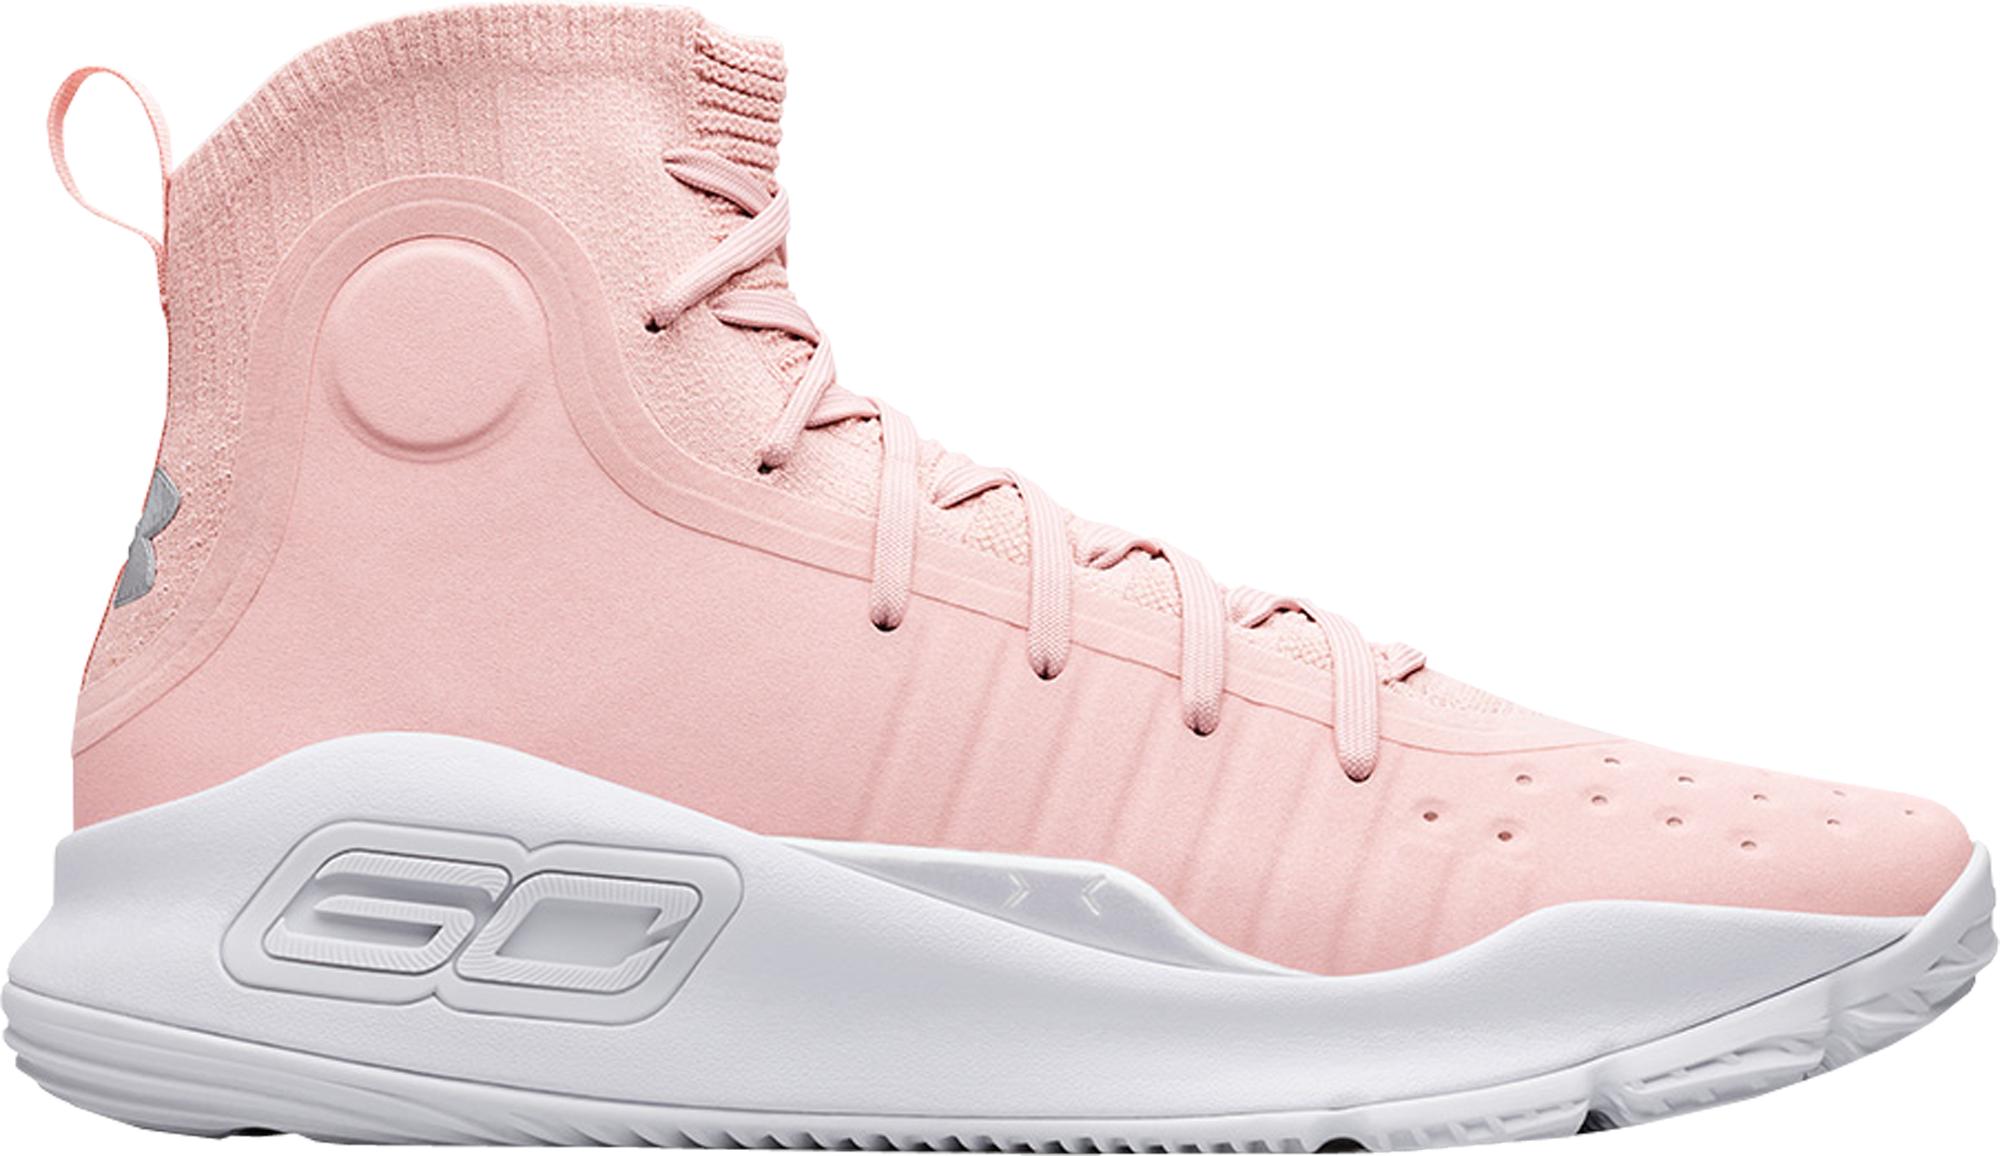 https://images-wp.stockx.com/news/wp-content/uploads/2018/02/Under-Armour-Curry-4-Flushed-Pink.png